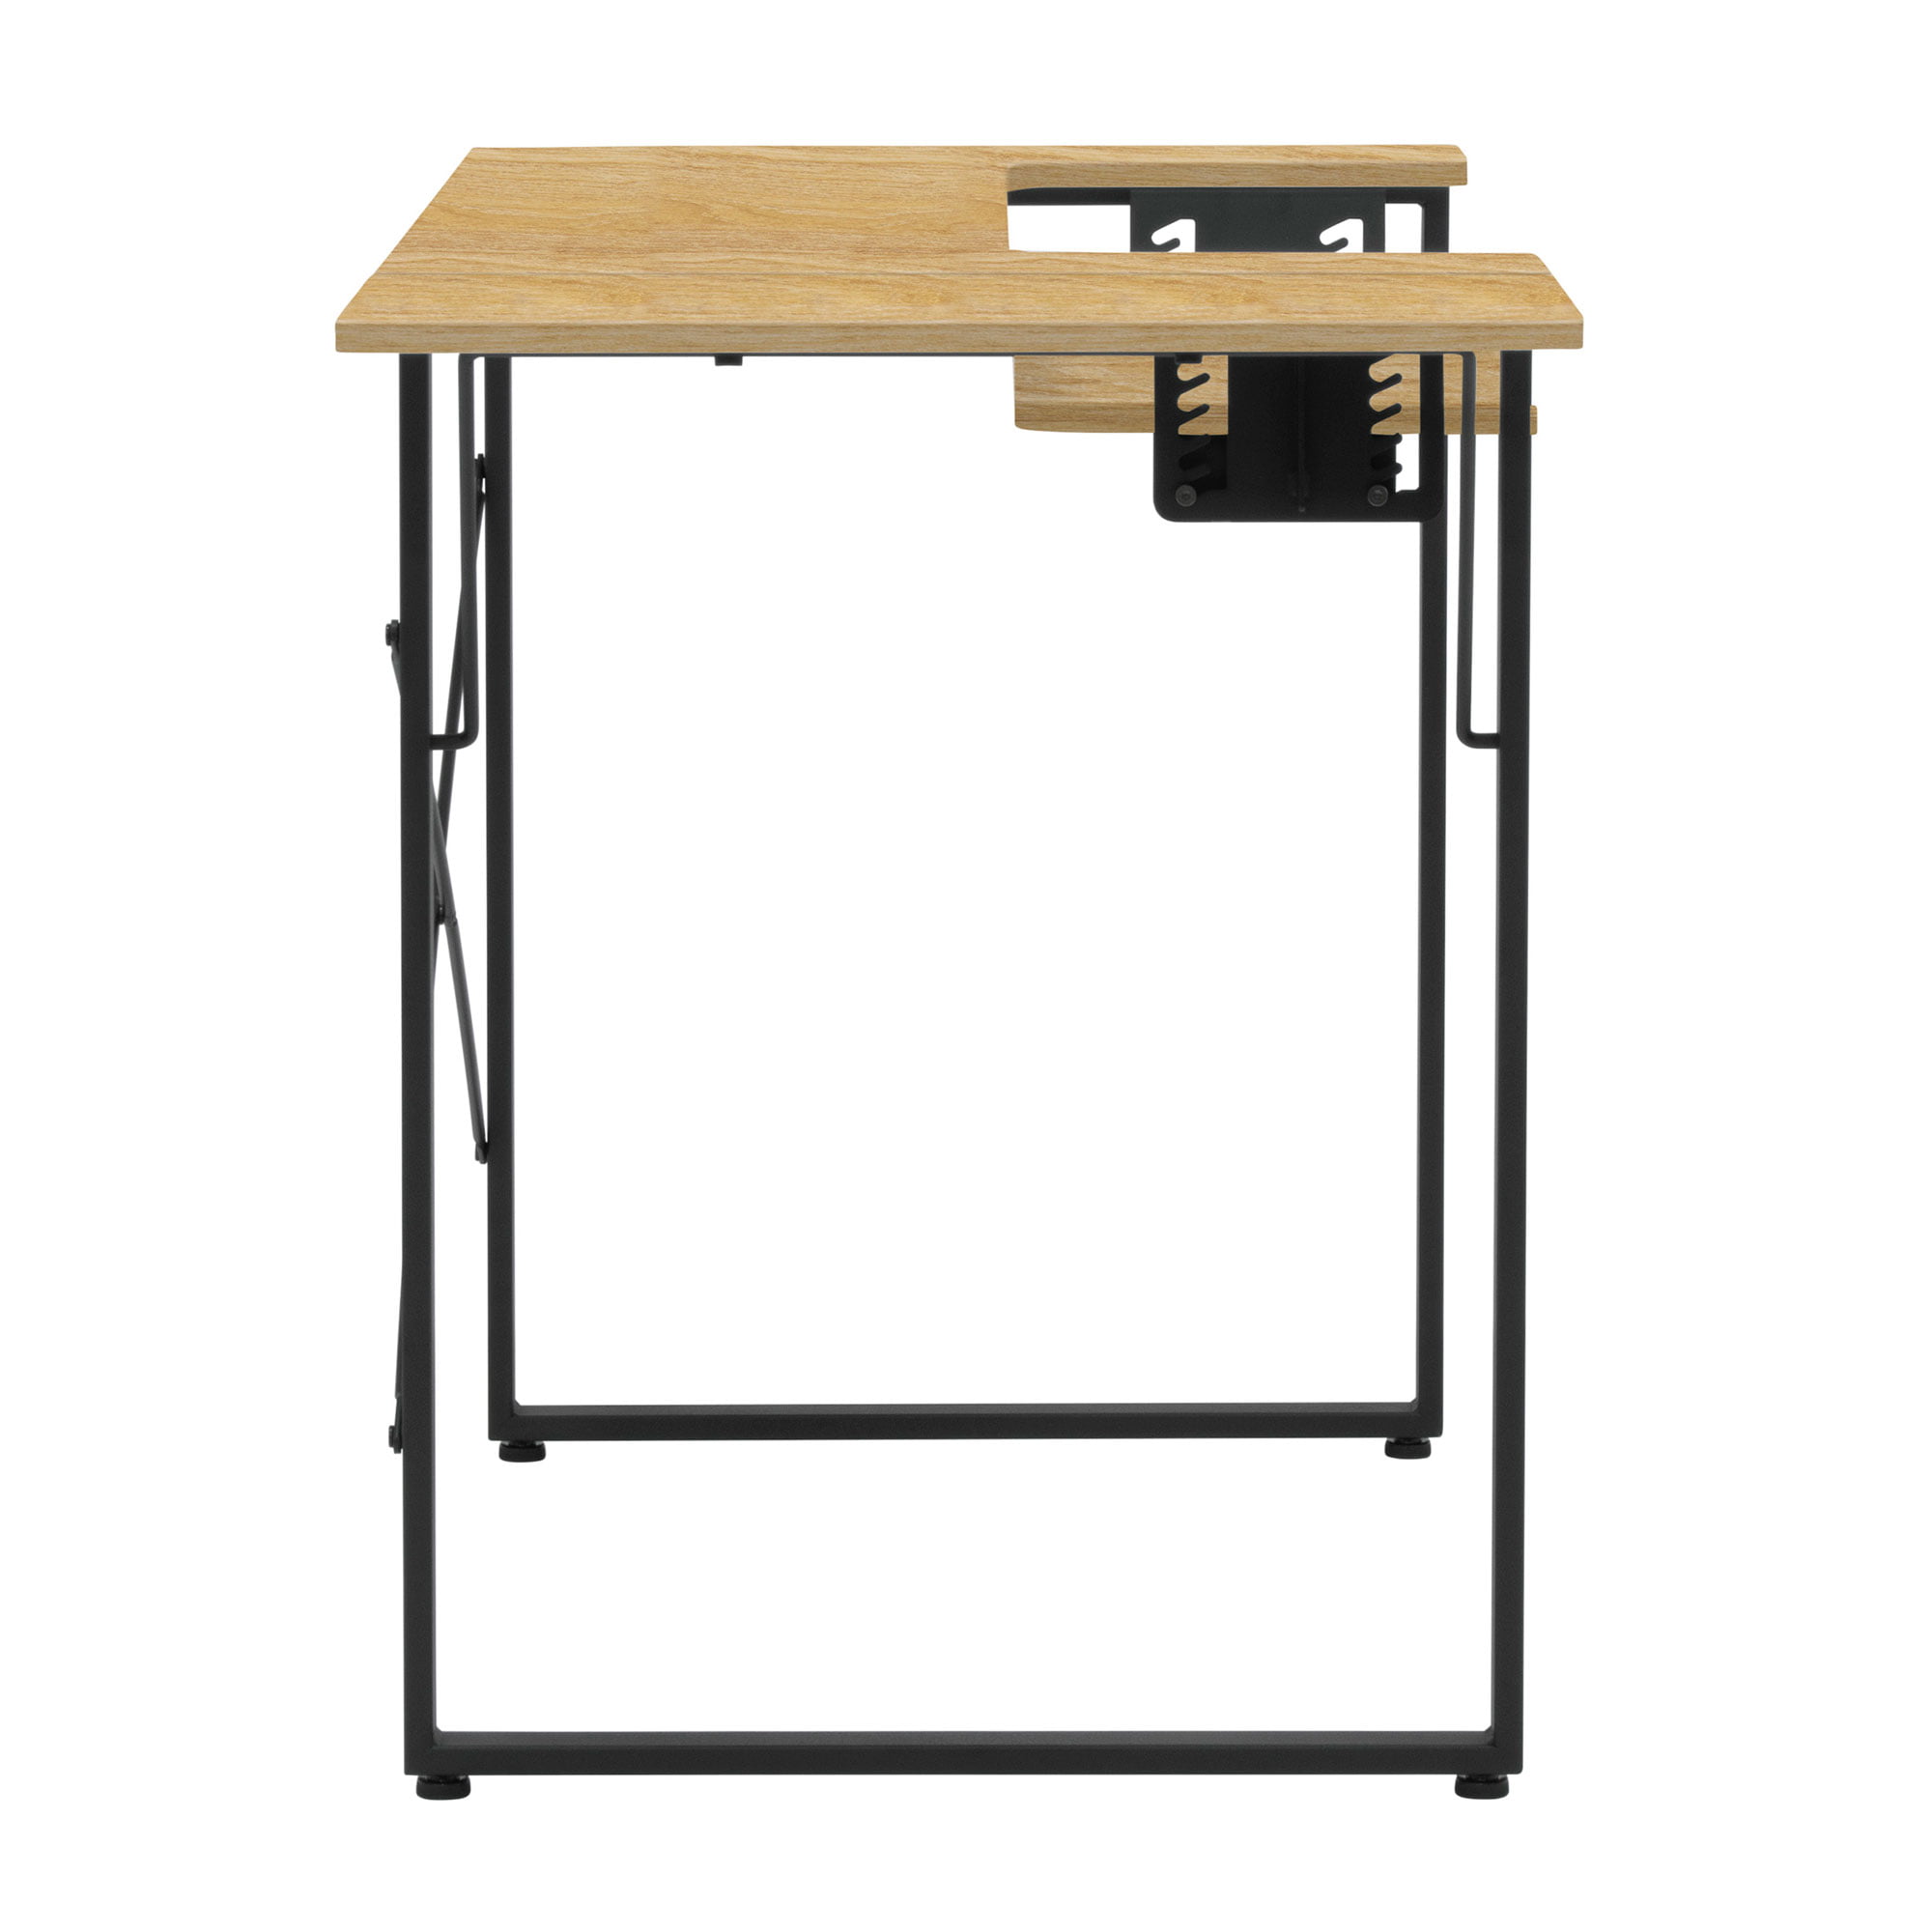 Black/Brown Sew Ready Dart Multipurpose Sewing Table Workstation w/ Folding Top 